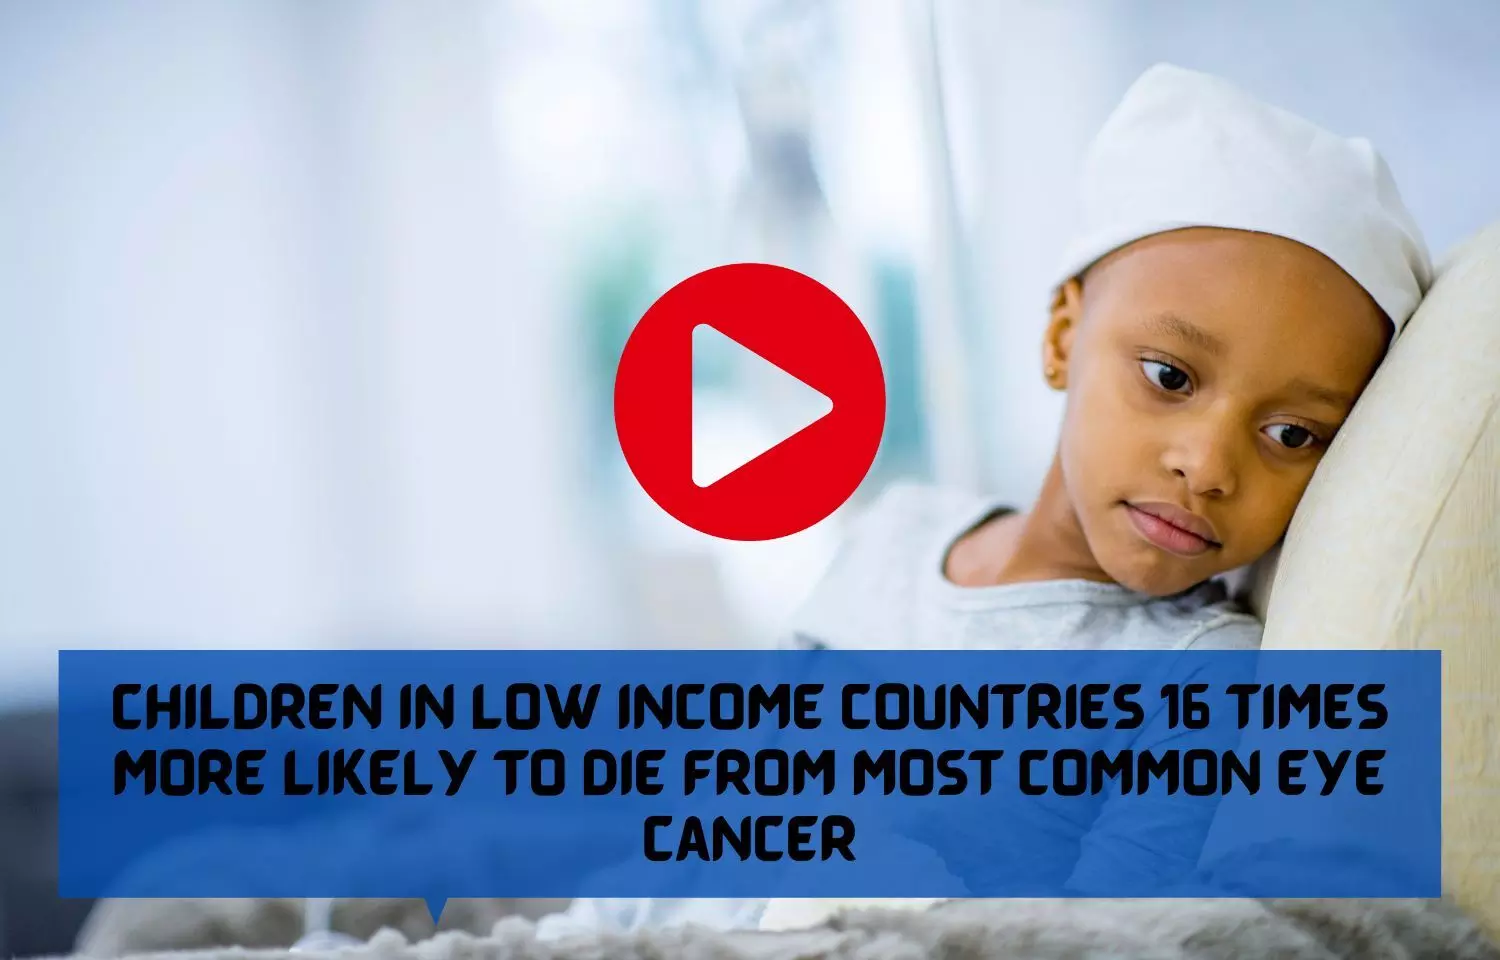 Children in low income countries 16 times more likely to die from most common eye cancer